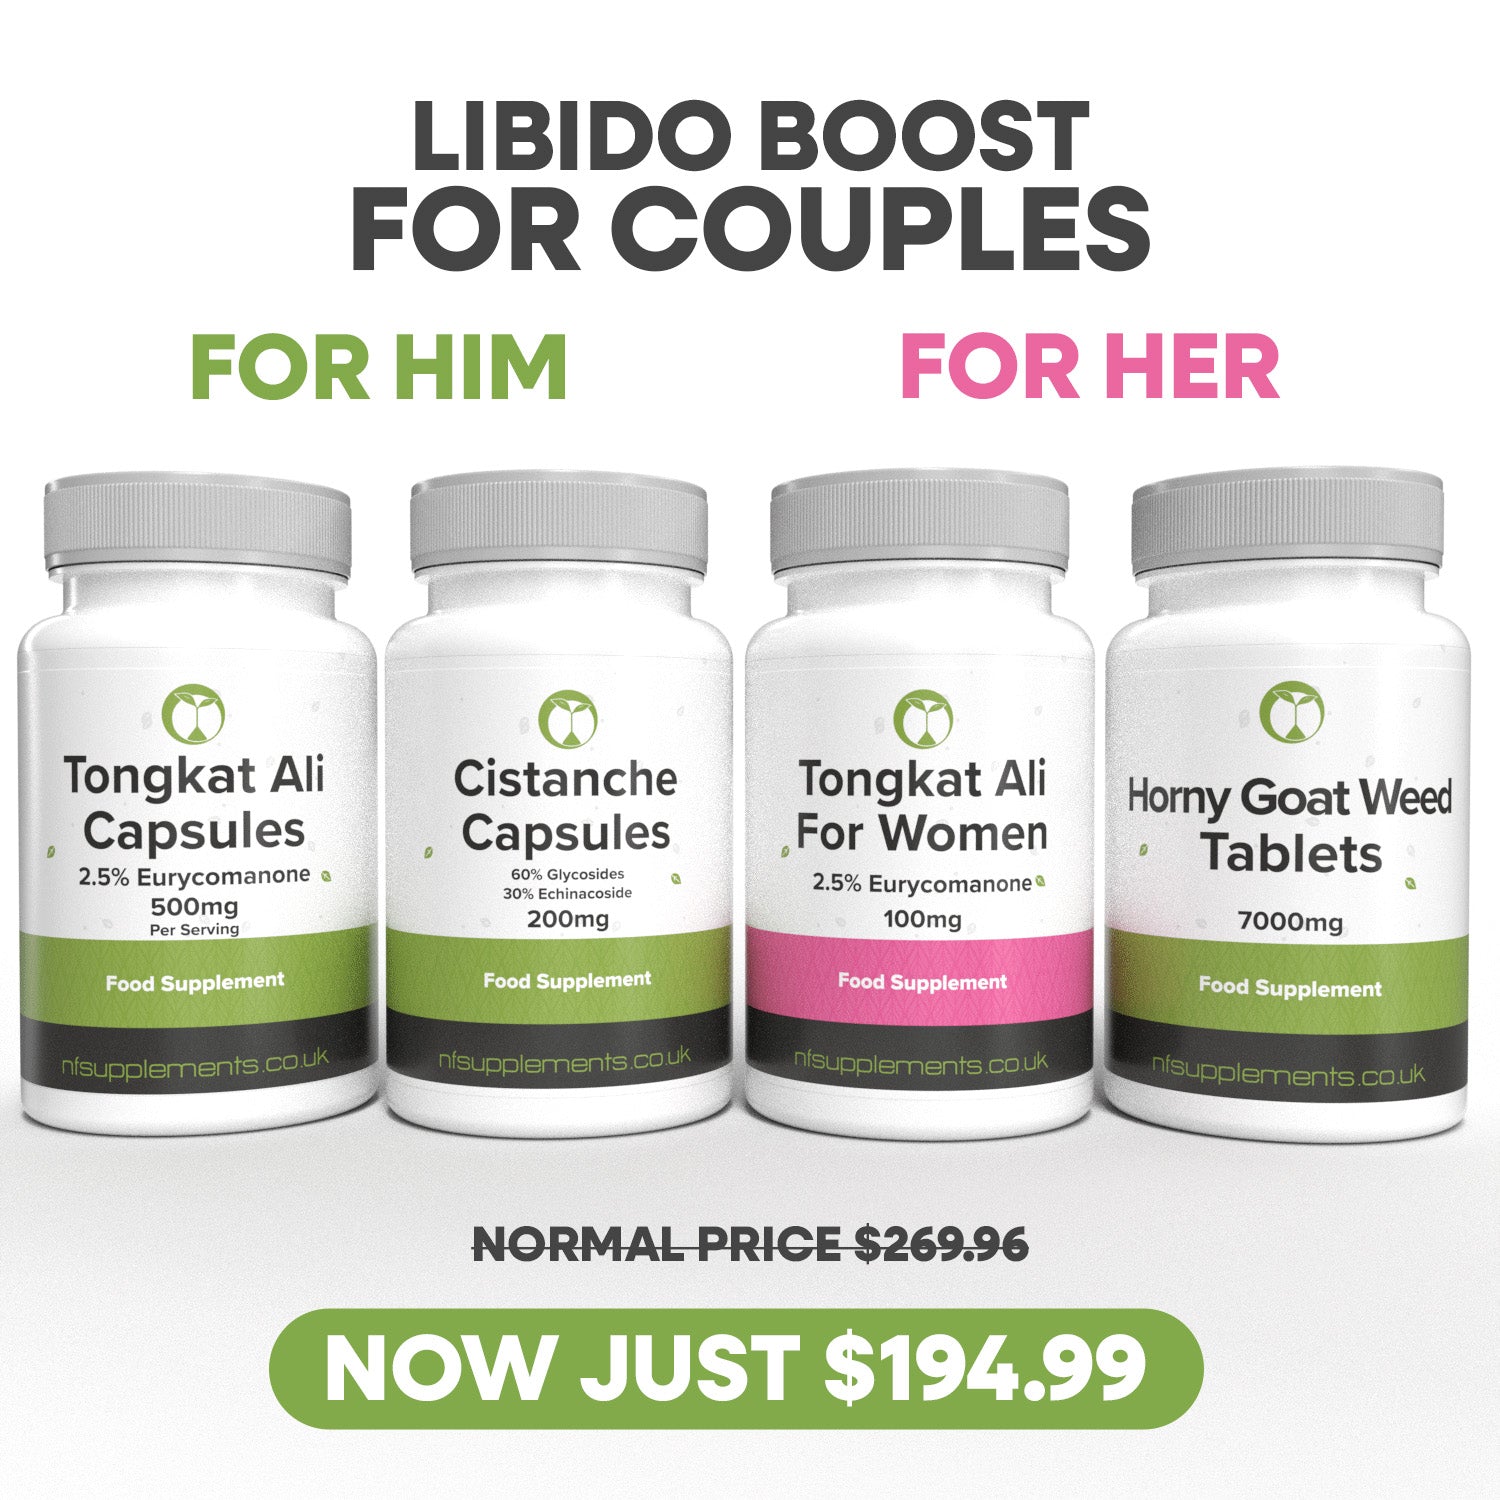 Libido Boost For Couples